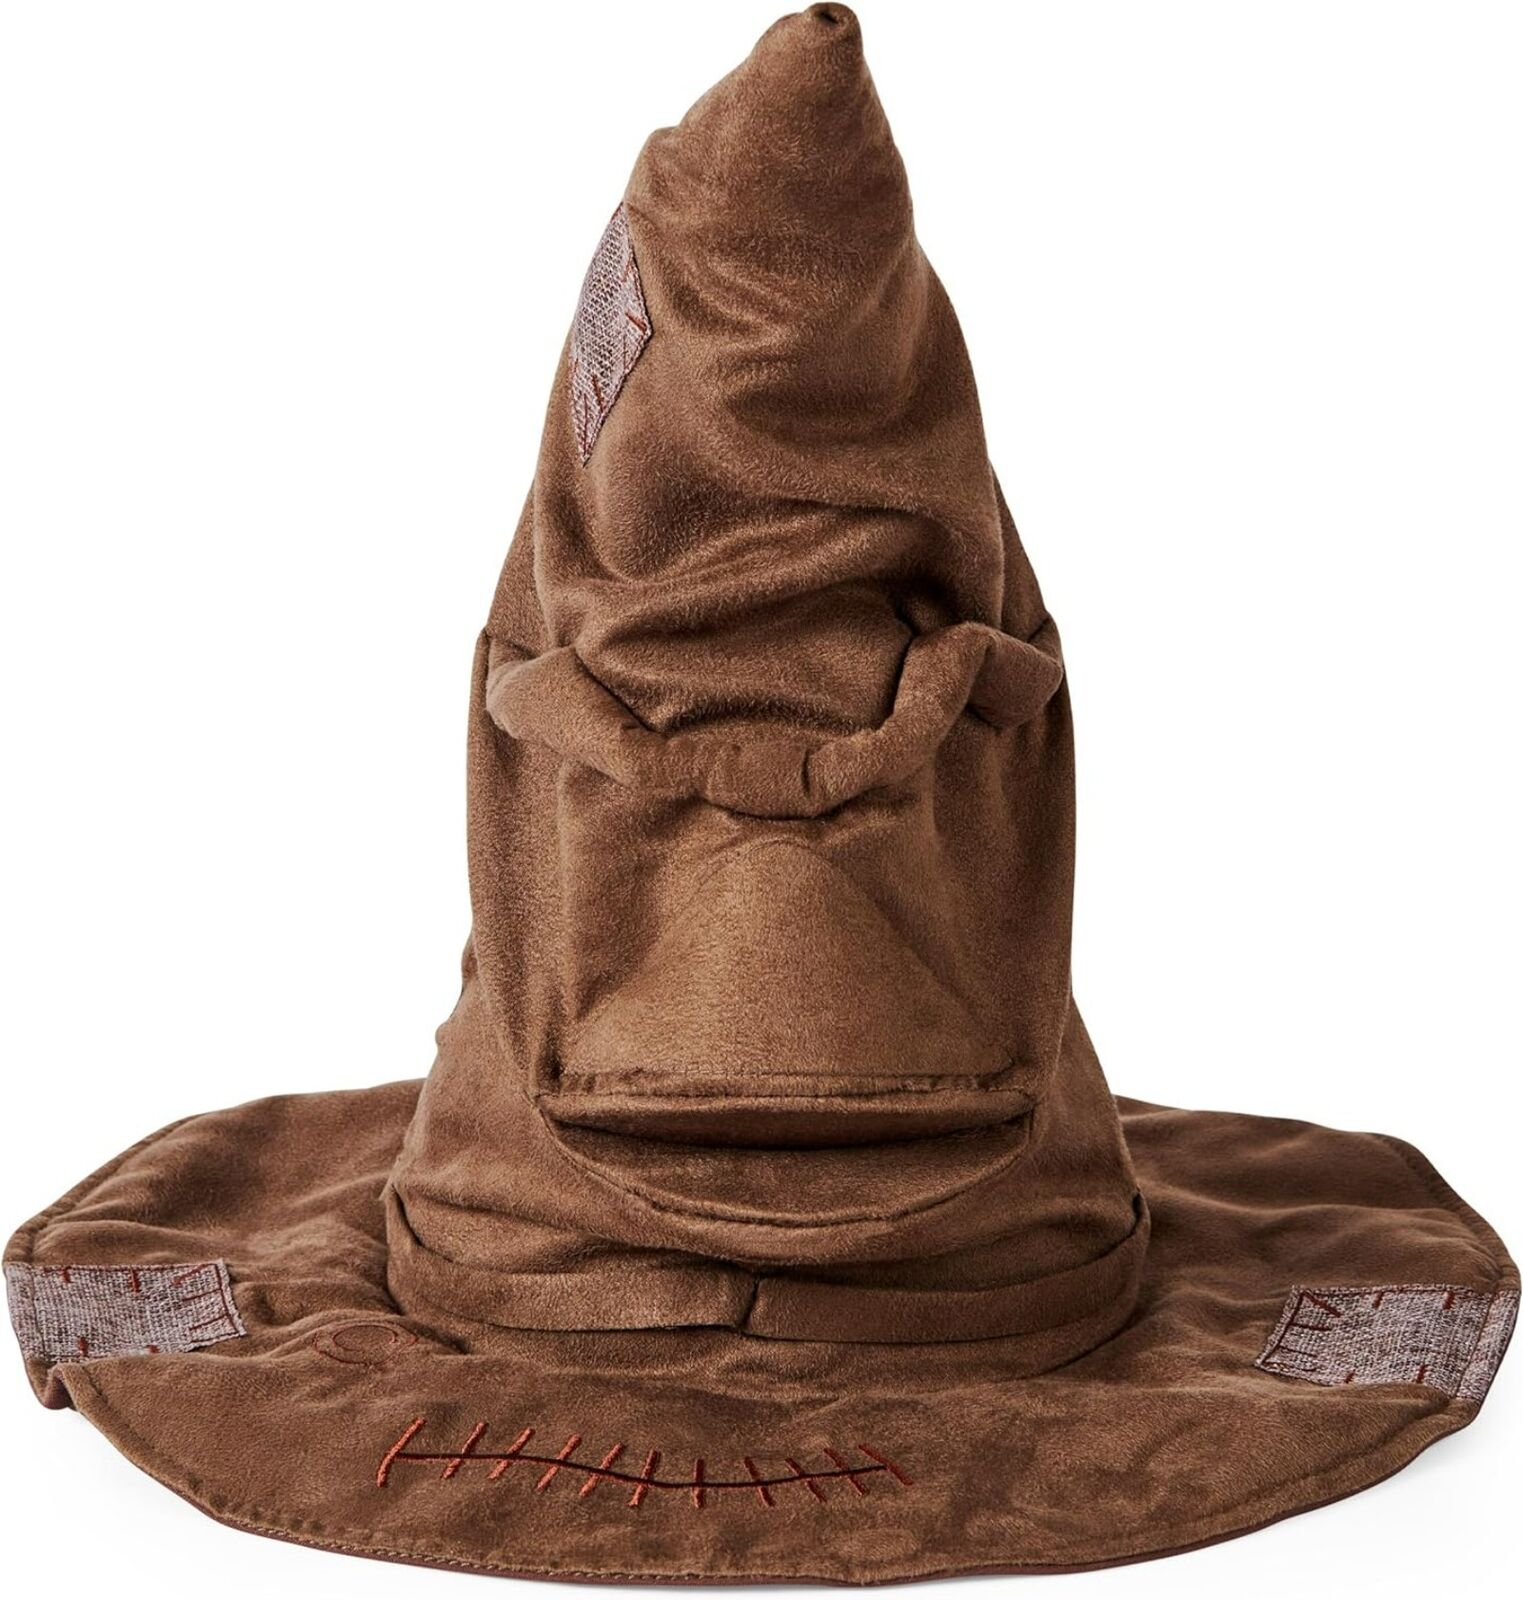 Talking Sorting Hat with 15 Phrases for Pretend Play,Kids Toys for Ages 5 and Up